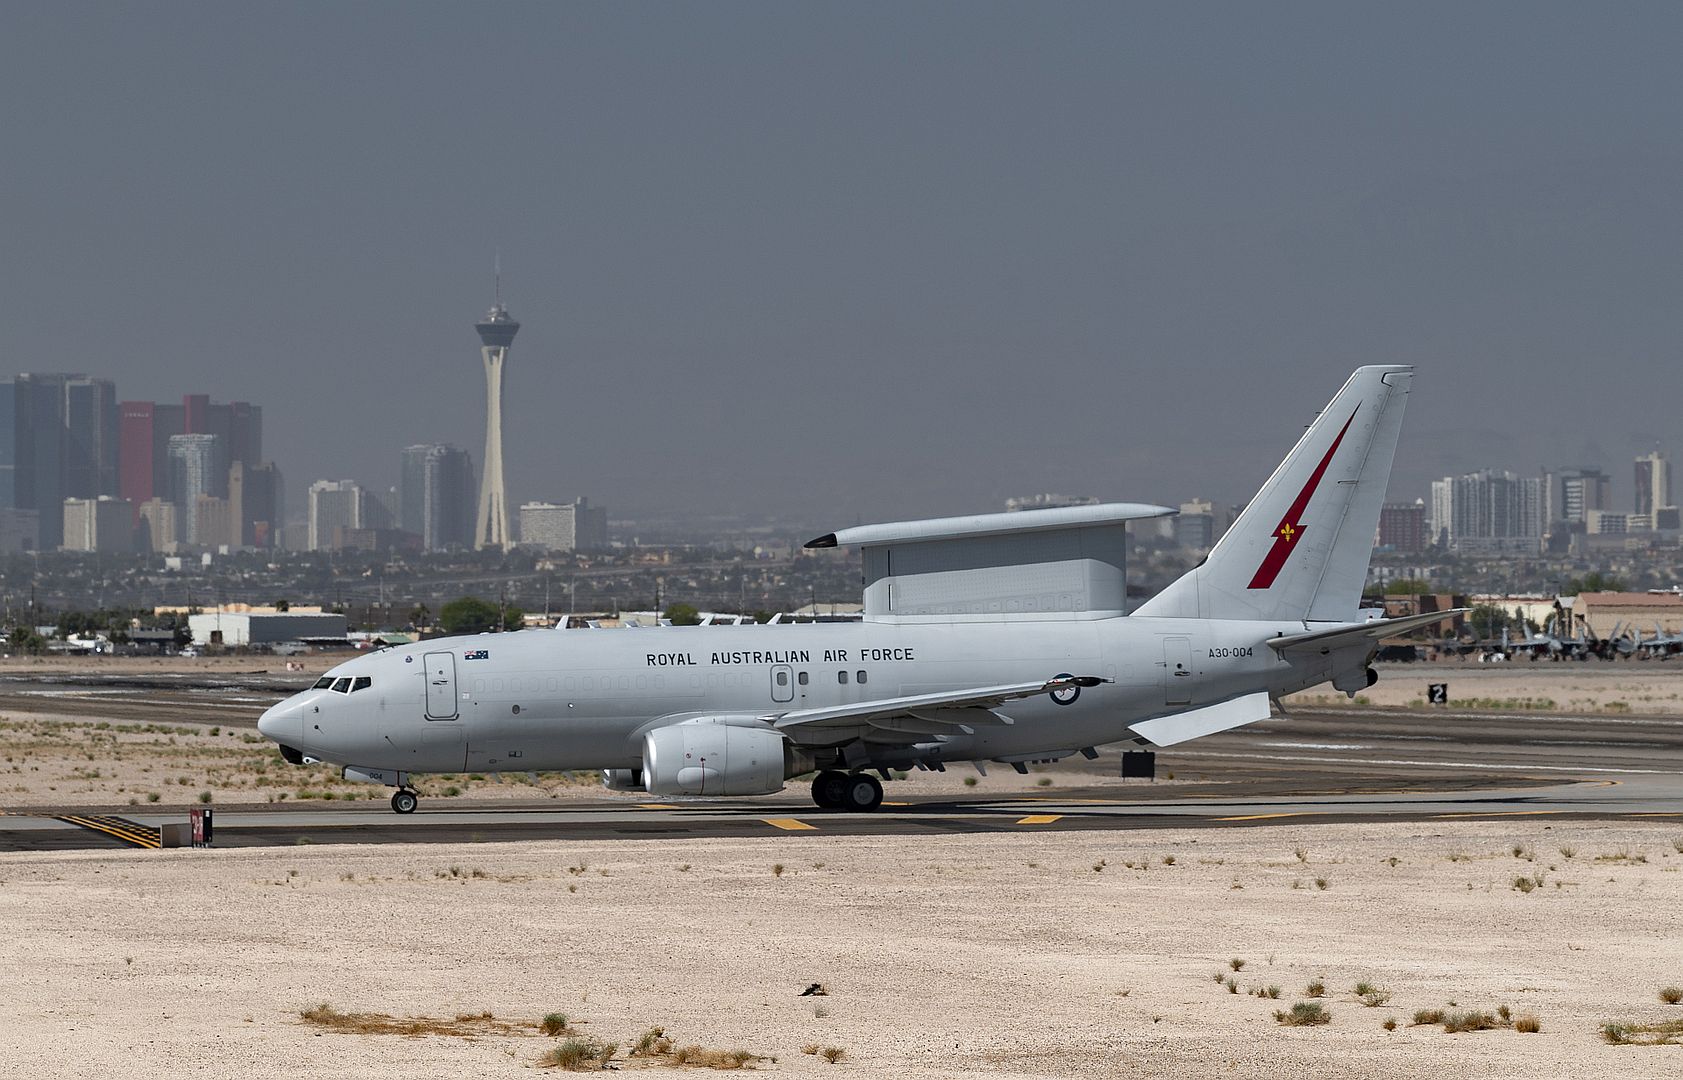 7A Wedgetail Taxis For Takeoff For A Mission At Nellis Air Force Base Nevada April 29 2022